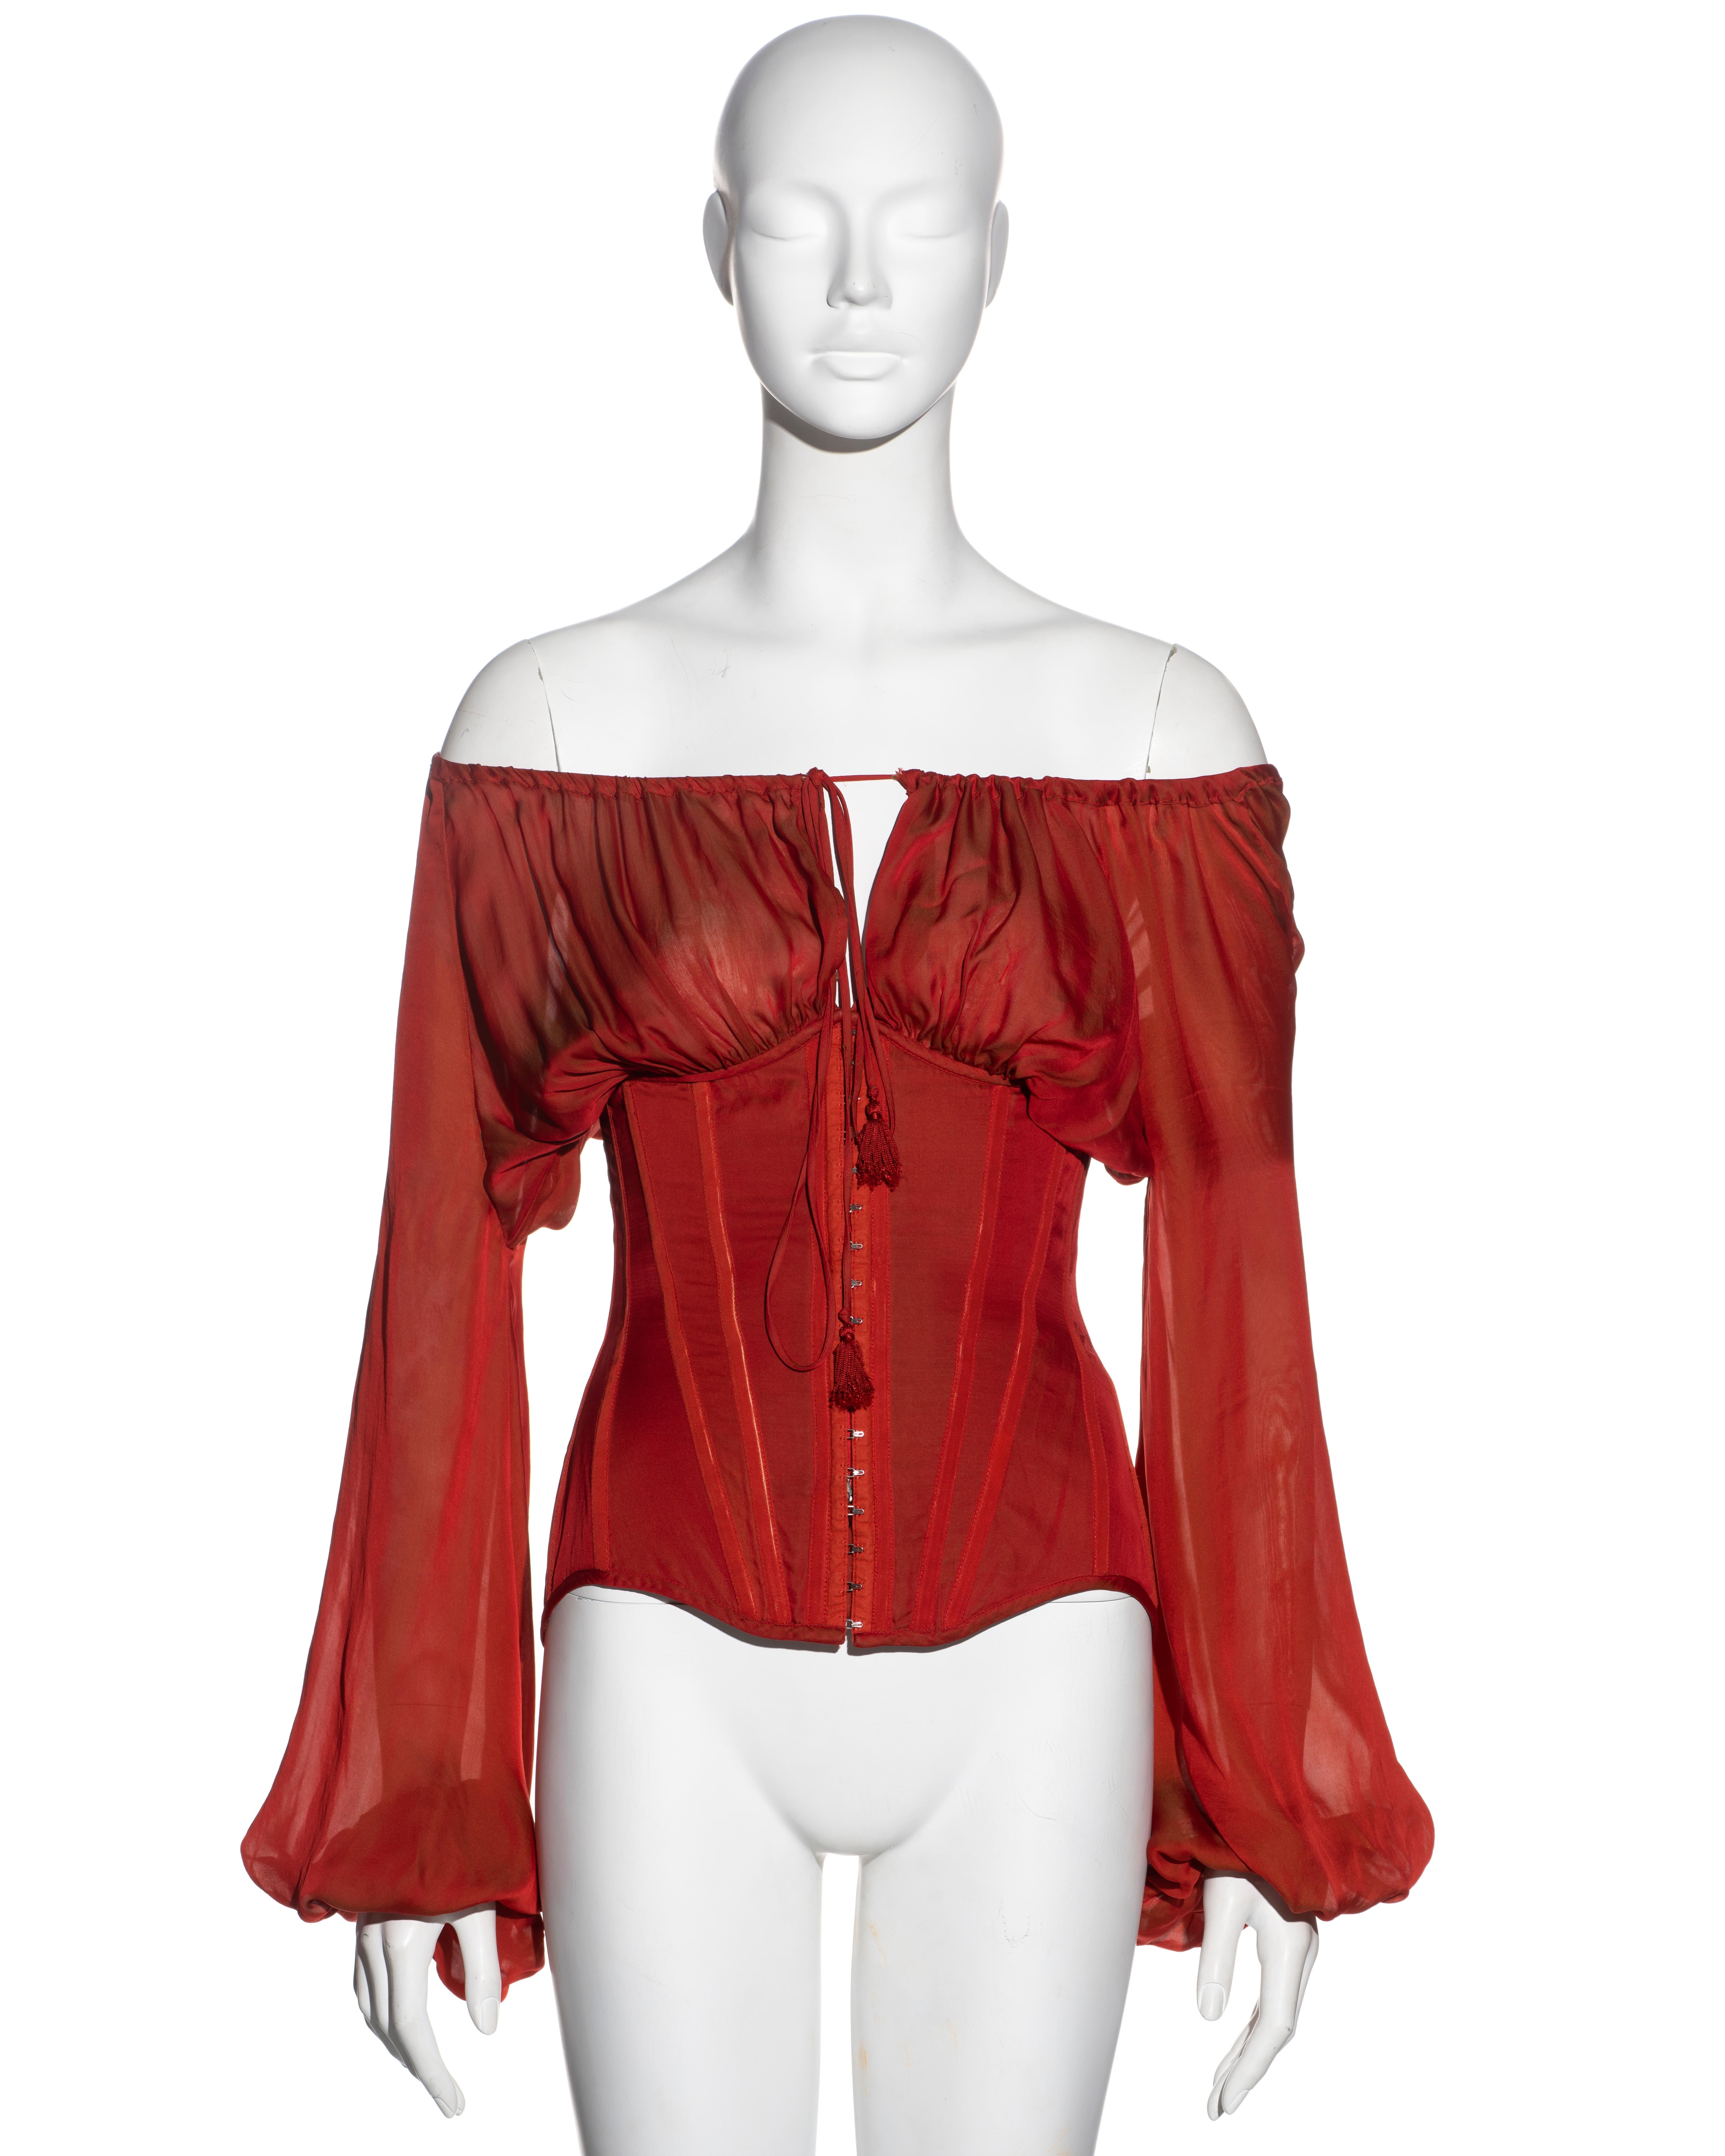 ▪ Jean Paul Gaultier corset 
▪ Sold by One of a Kind Archive 
▪ Constructed from red silk
▪ Full sleeves
▪ Off-shoulder neckline with drawstring ties 
▪ Structured bodice with multiple built-in corset bones 
▪ Metal corset hooks conceal a metal